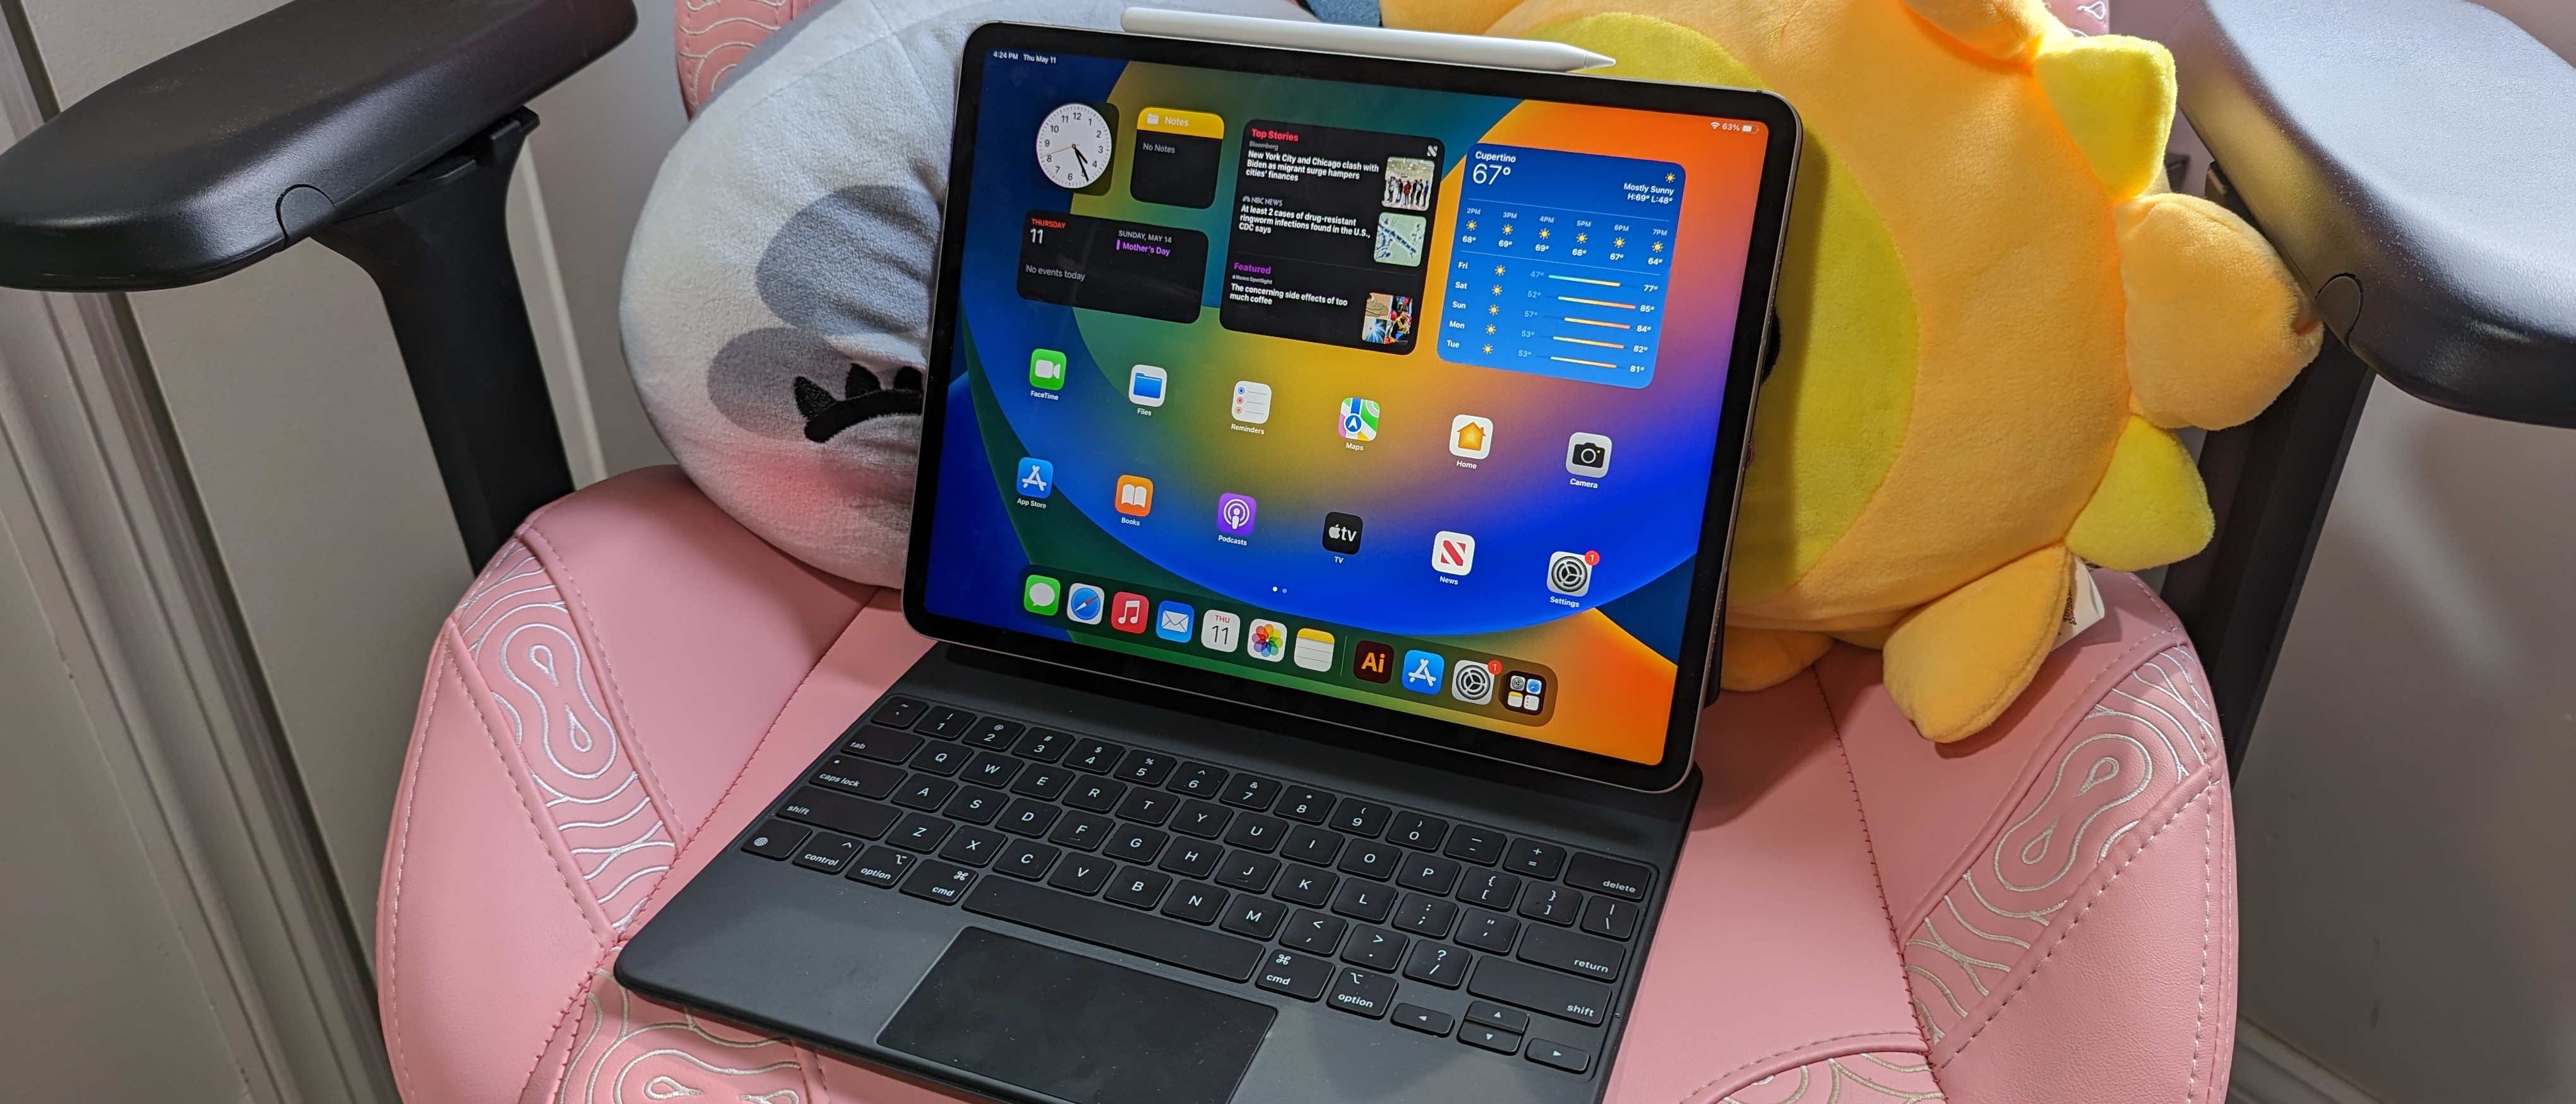 iPad Pro 12.9-inch (6th generation) - Technical Specifications